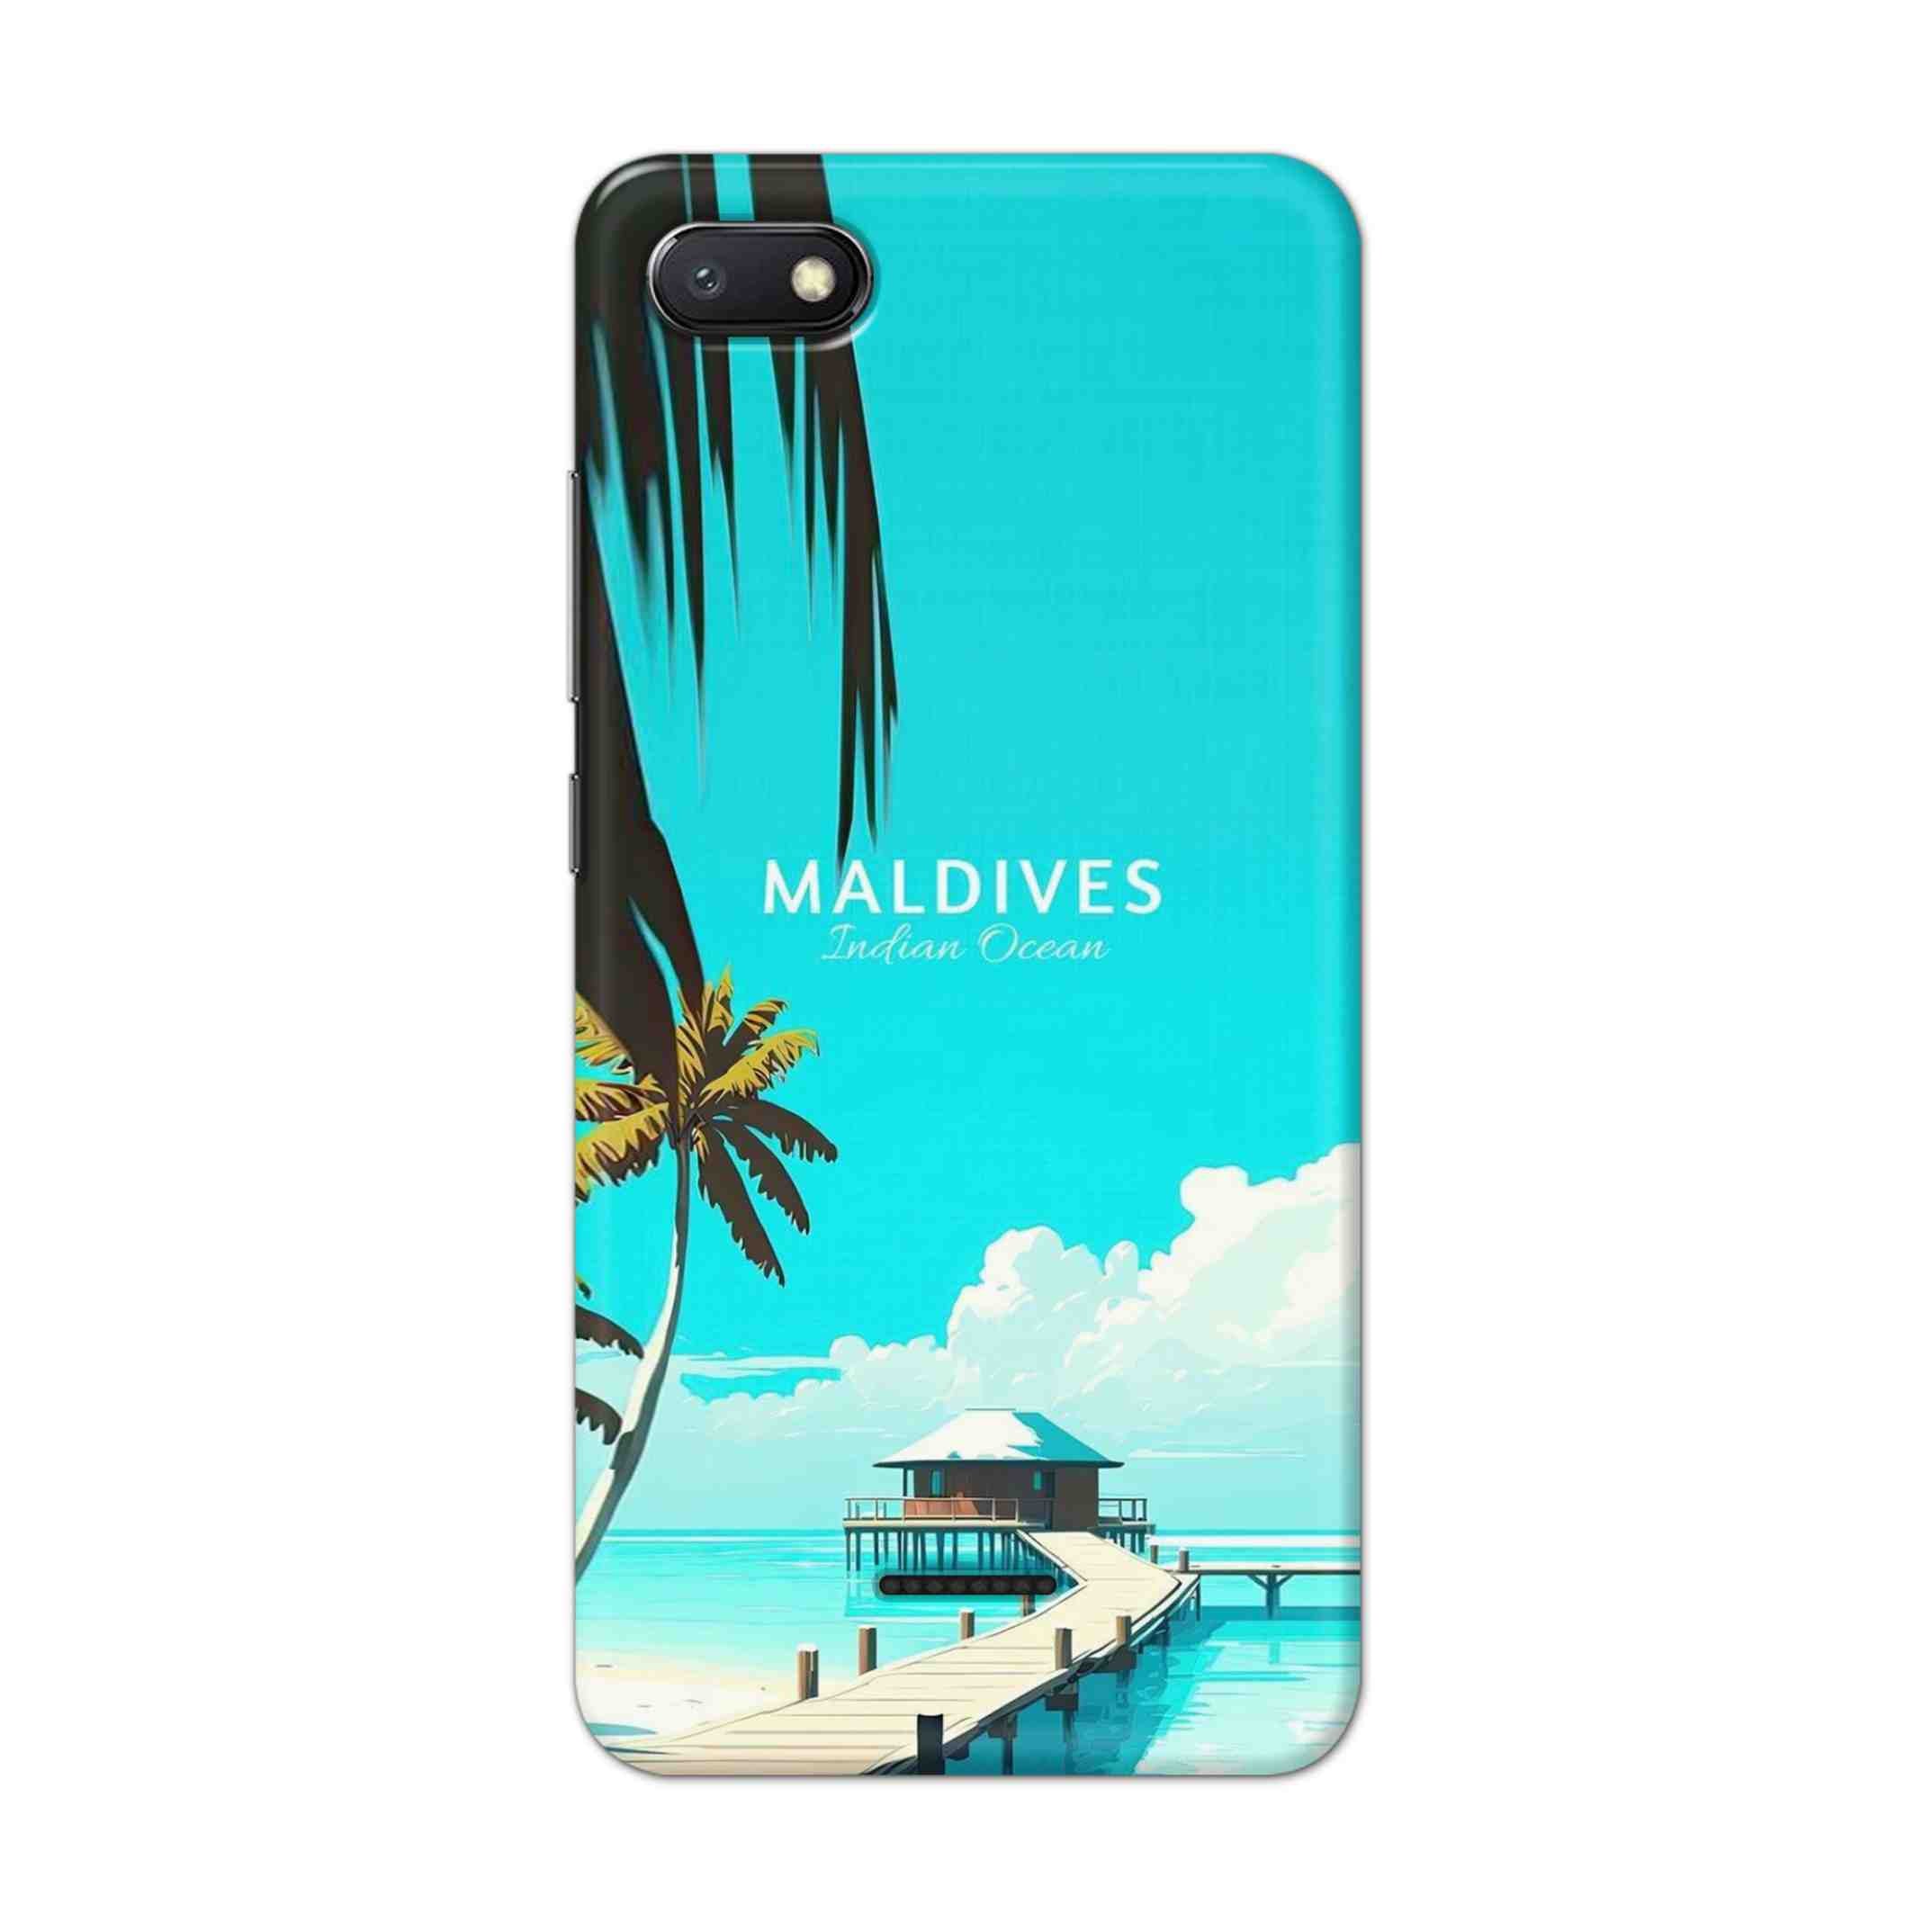 Buy Maldives Hard Back Mobile Phone Case/Cover For Xiaomi Redmi 6A Online